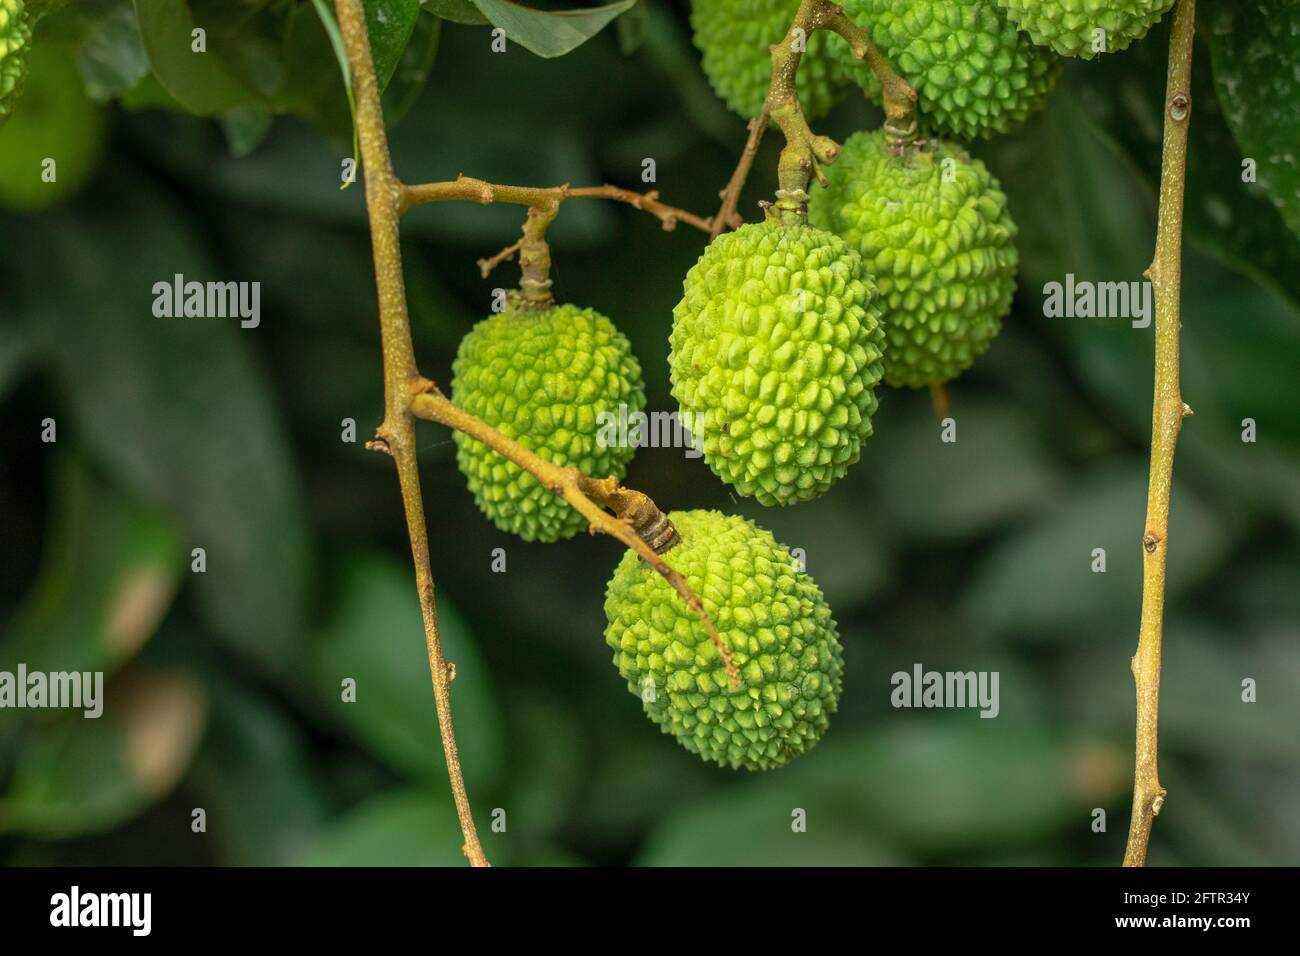 Green litchi or lychee which is a seasonal fruit and very sweet delicious when it ripe Stock Photo